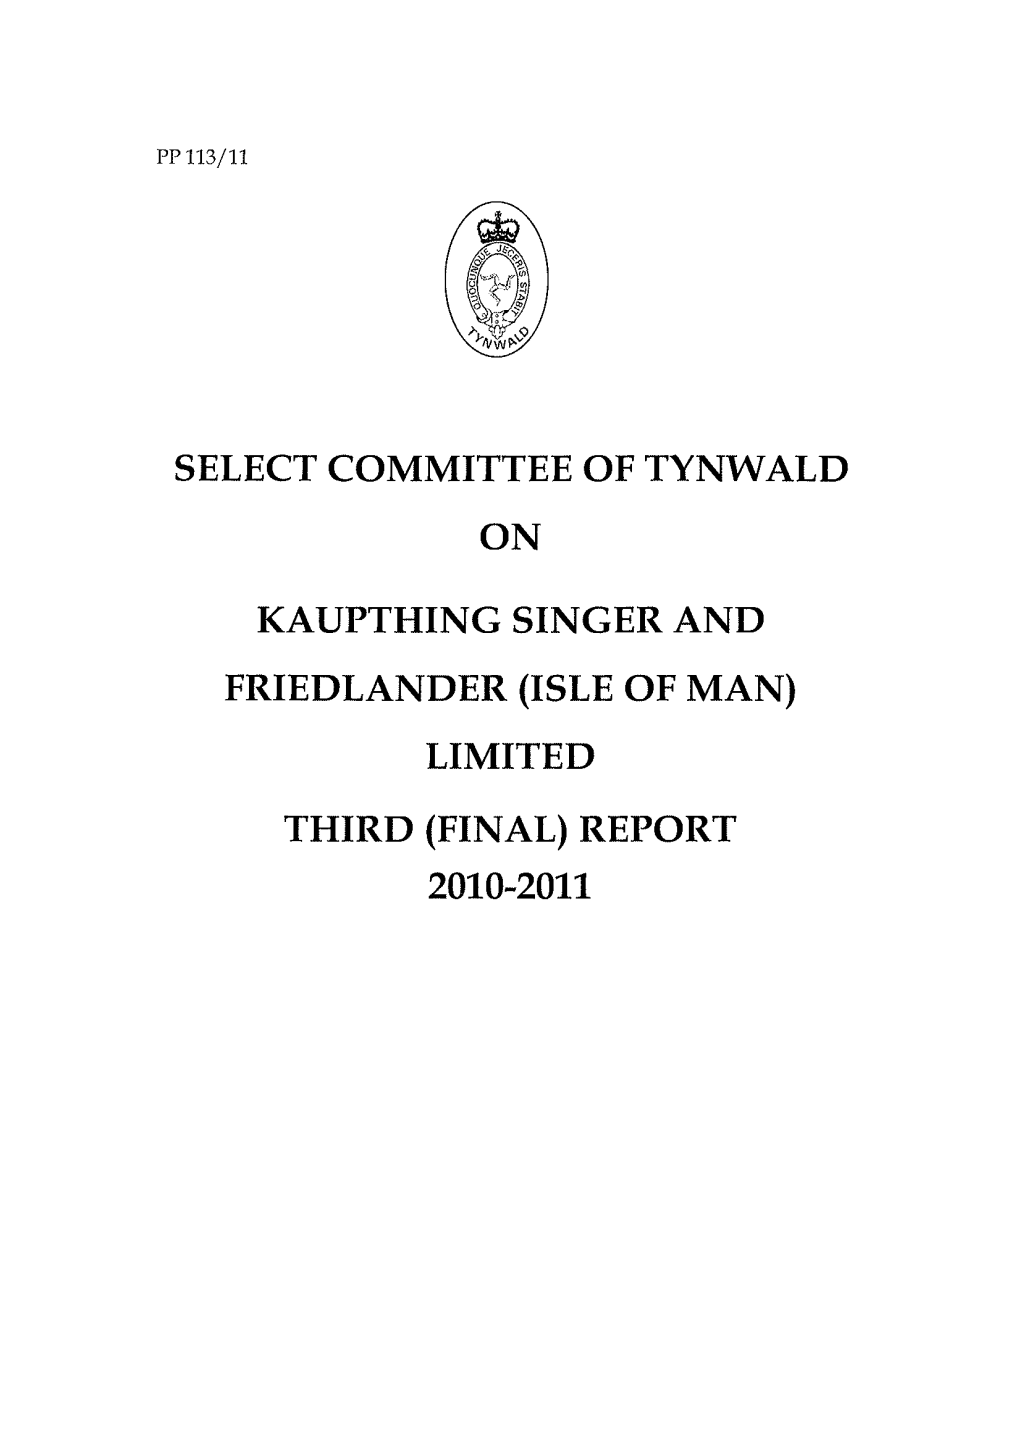 Select Committee of Tynwald on Kaupthing Singer and Friedlander (Isle of Man) Limited Third (Final) Report 2010-2011